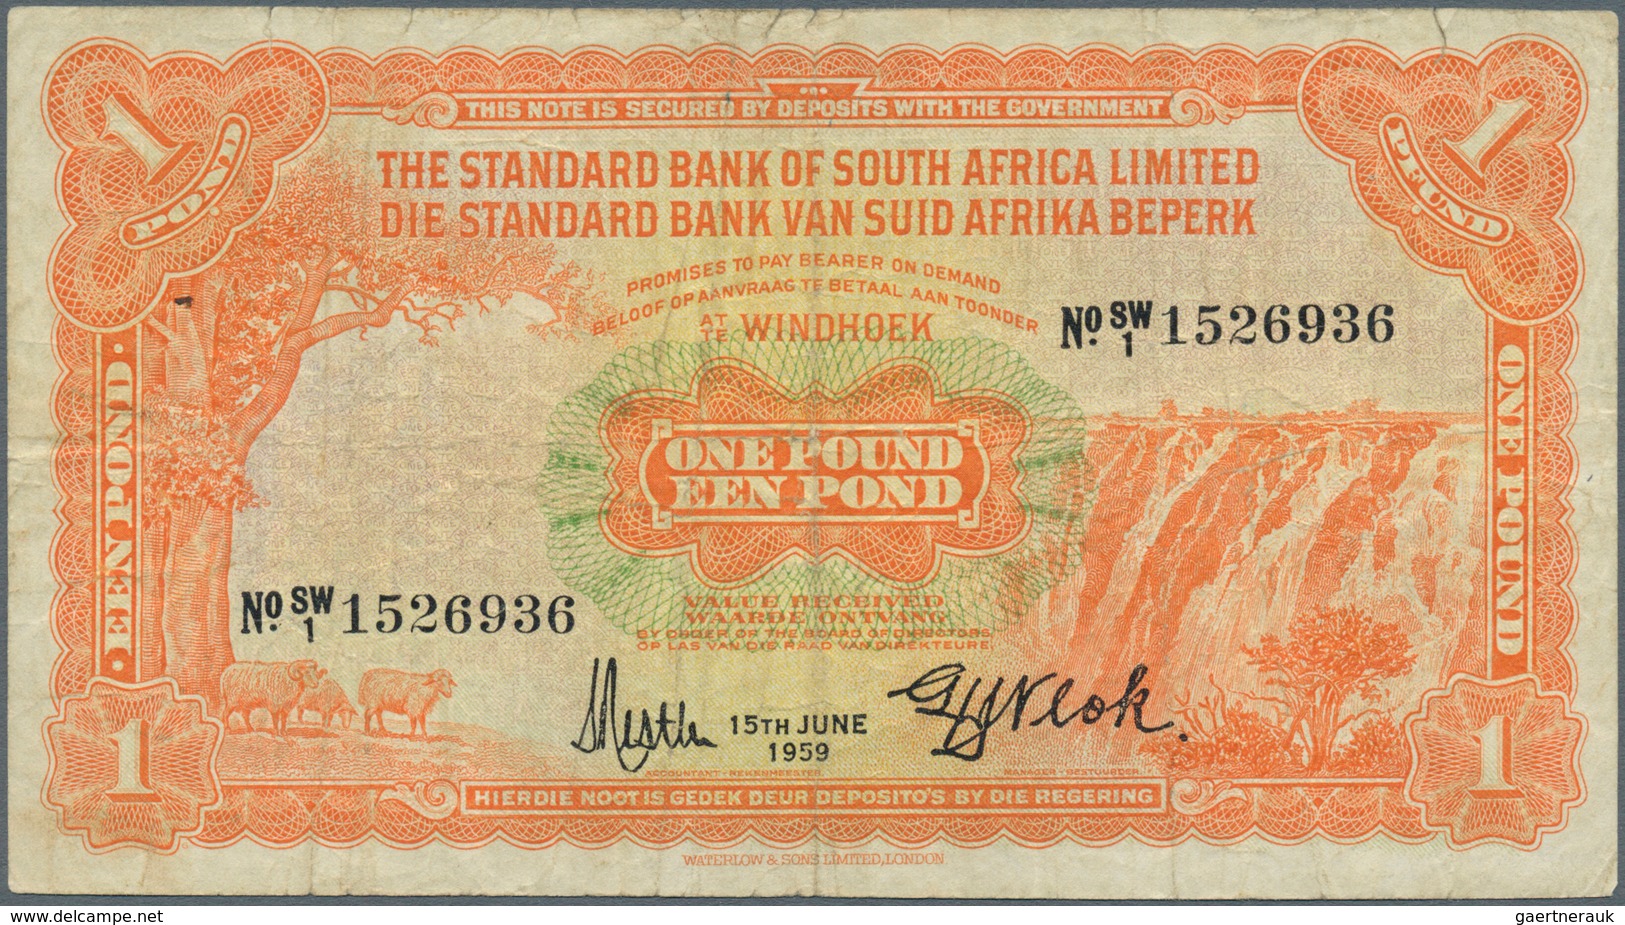 02393 Southwest Africa: 1 Pound 1959 P. 11, Used With Several Folds And Creases, Stained Paper, Minor Cent - Namibia